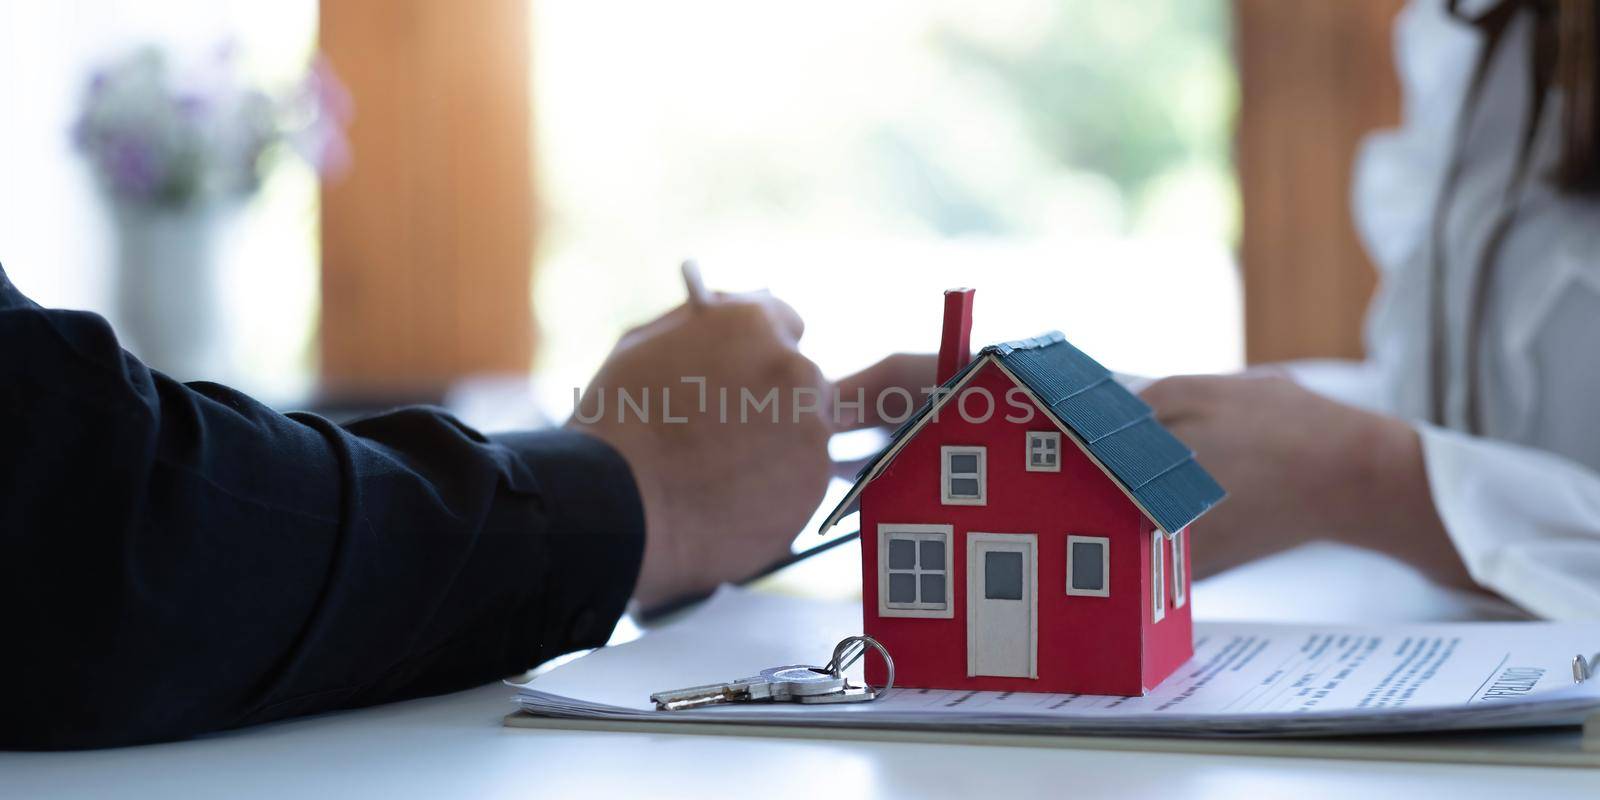 The real estate agent is explaining the house style to the clients who come to contact to see the house design and the purchase agreement. Within a modern office.